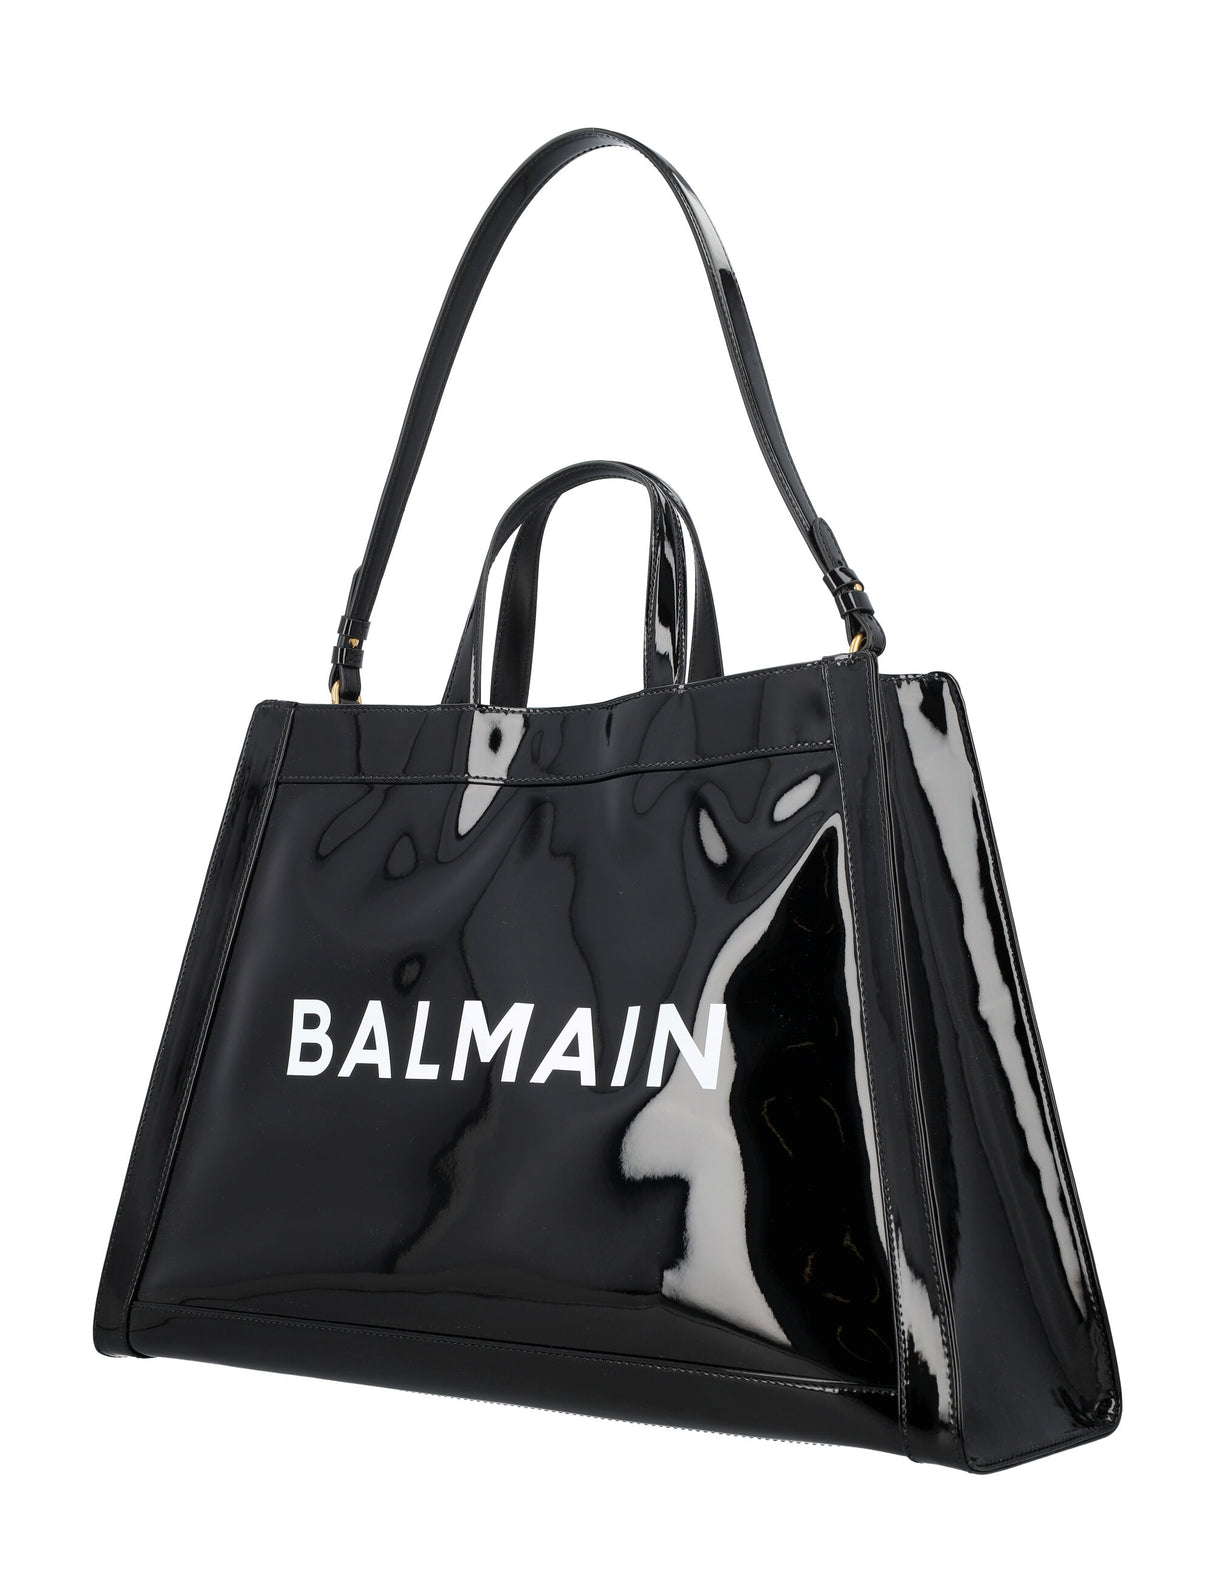 OLIVIER'S PATENT Tote Handbag BY BALMAIN - Patent Faux Leather Tote with Snap Closure